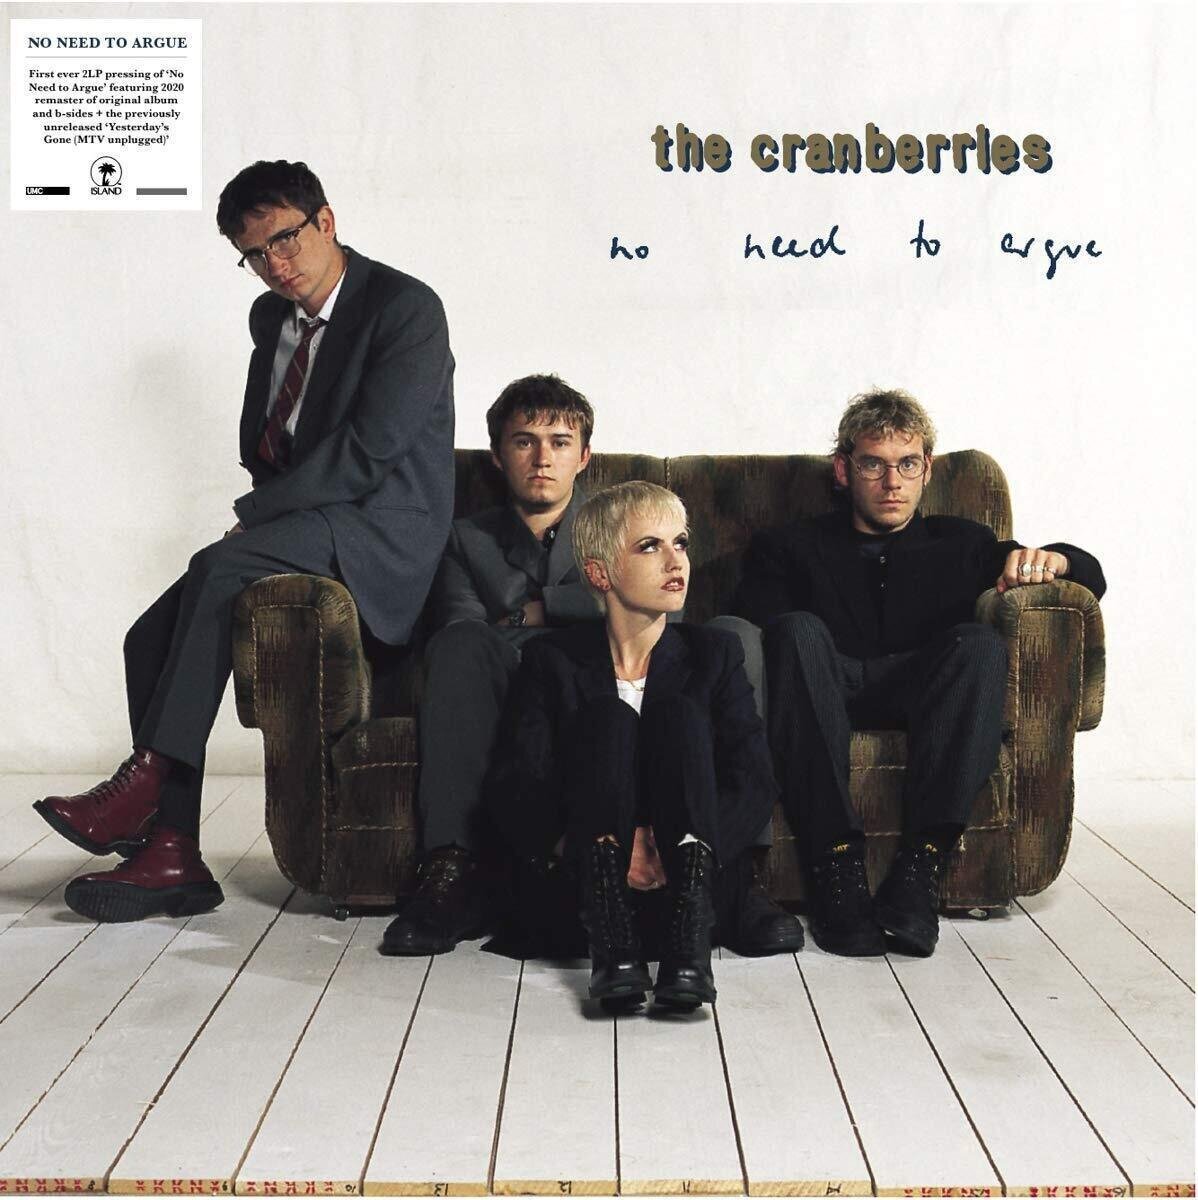 The Cranberries - No Need To Argue (Deluxe Edition) (2 LP) The Cranberries